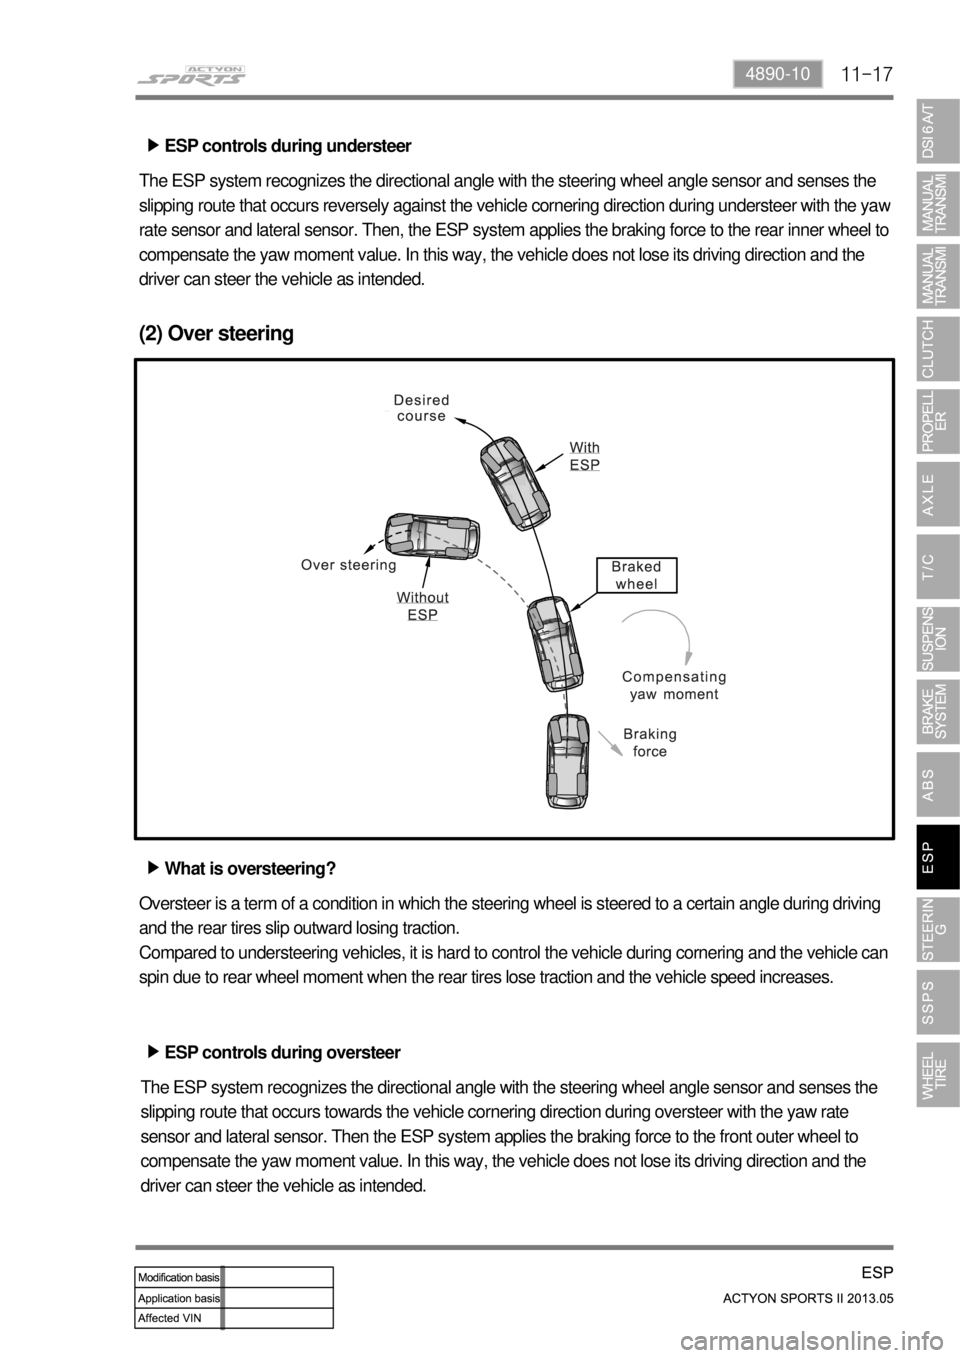 SSANGYONG NEW ACTYON SPORTS 2013  Service Manual 11-174890-10
ESP controls during understeer ▶
The ESP system recognizes the directional angle with the steering wheel angle sensor and senses the 
slipping route that occurs reversely against the ve